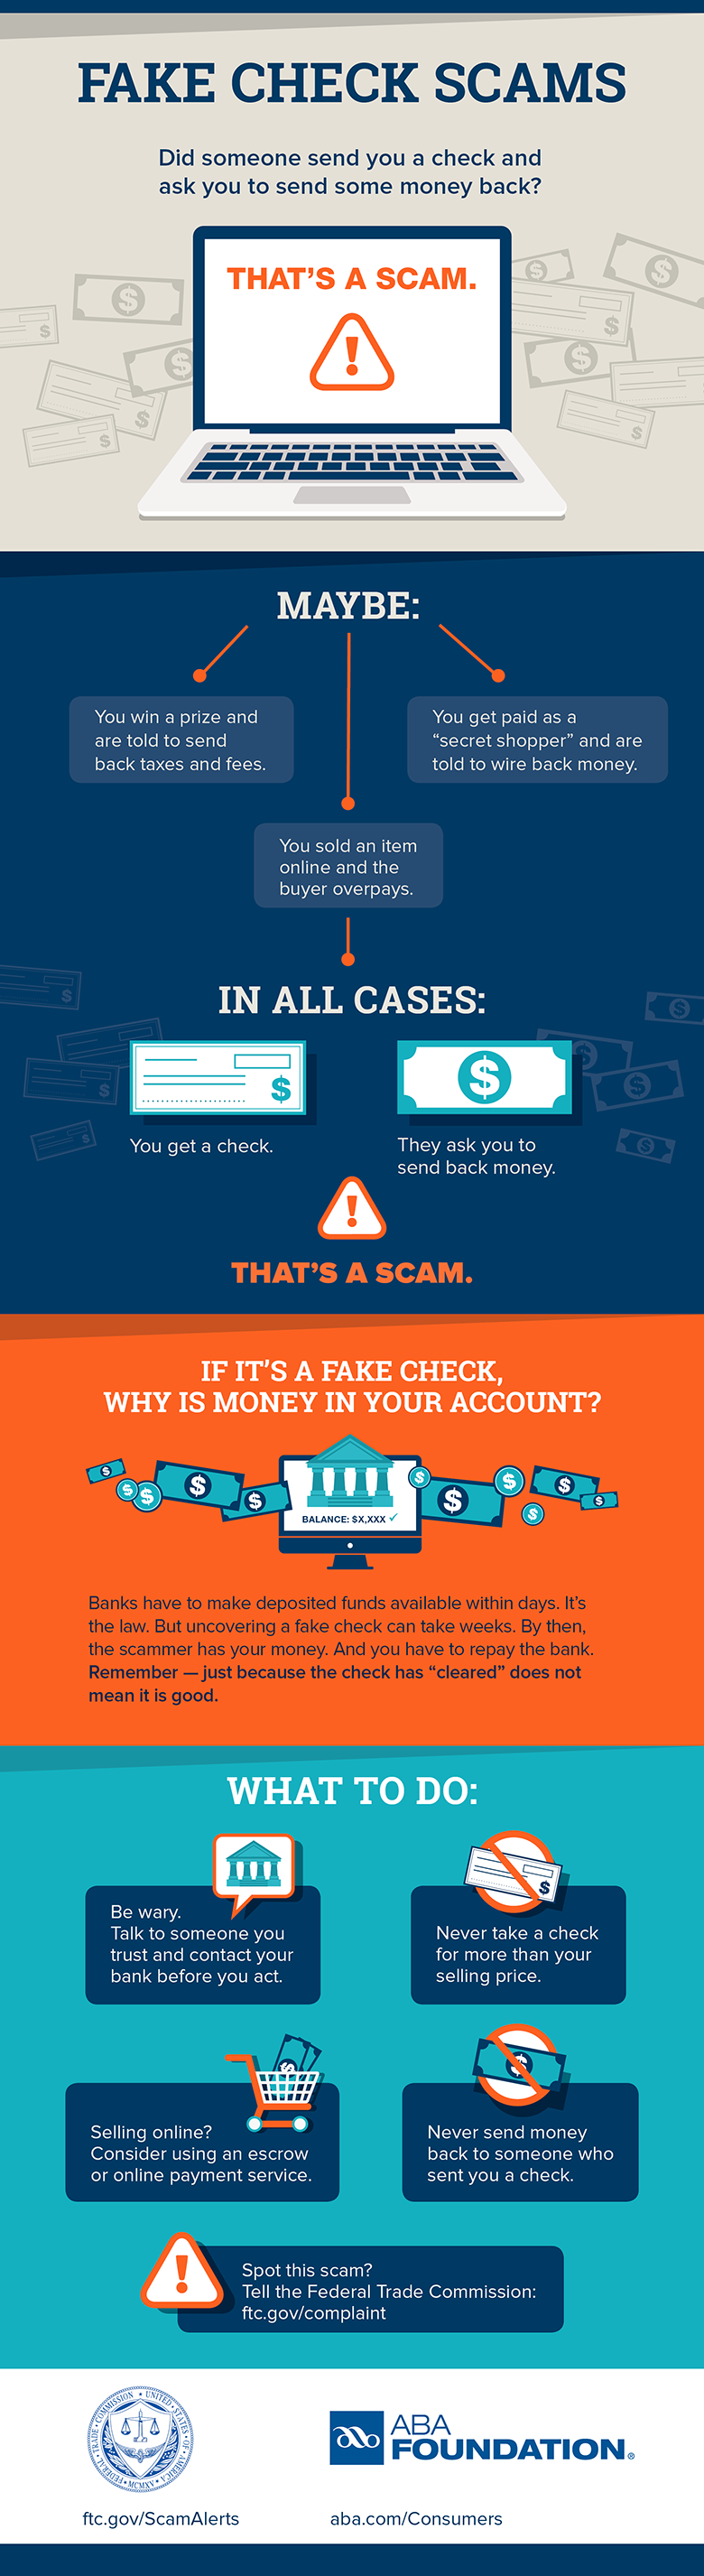 Fake Check Scams Infographic